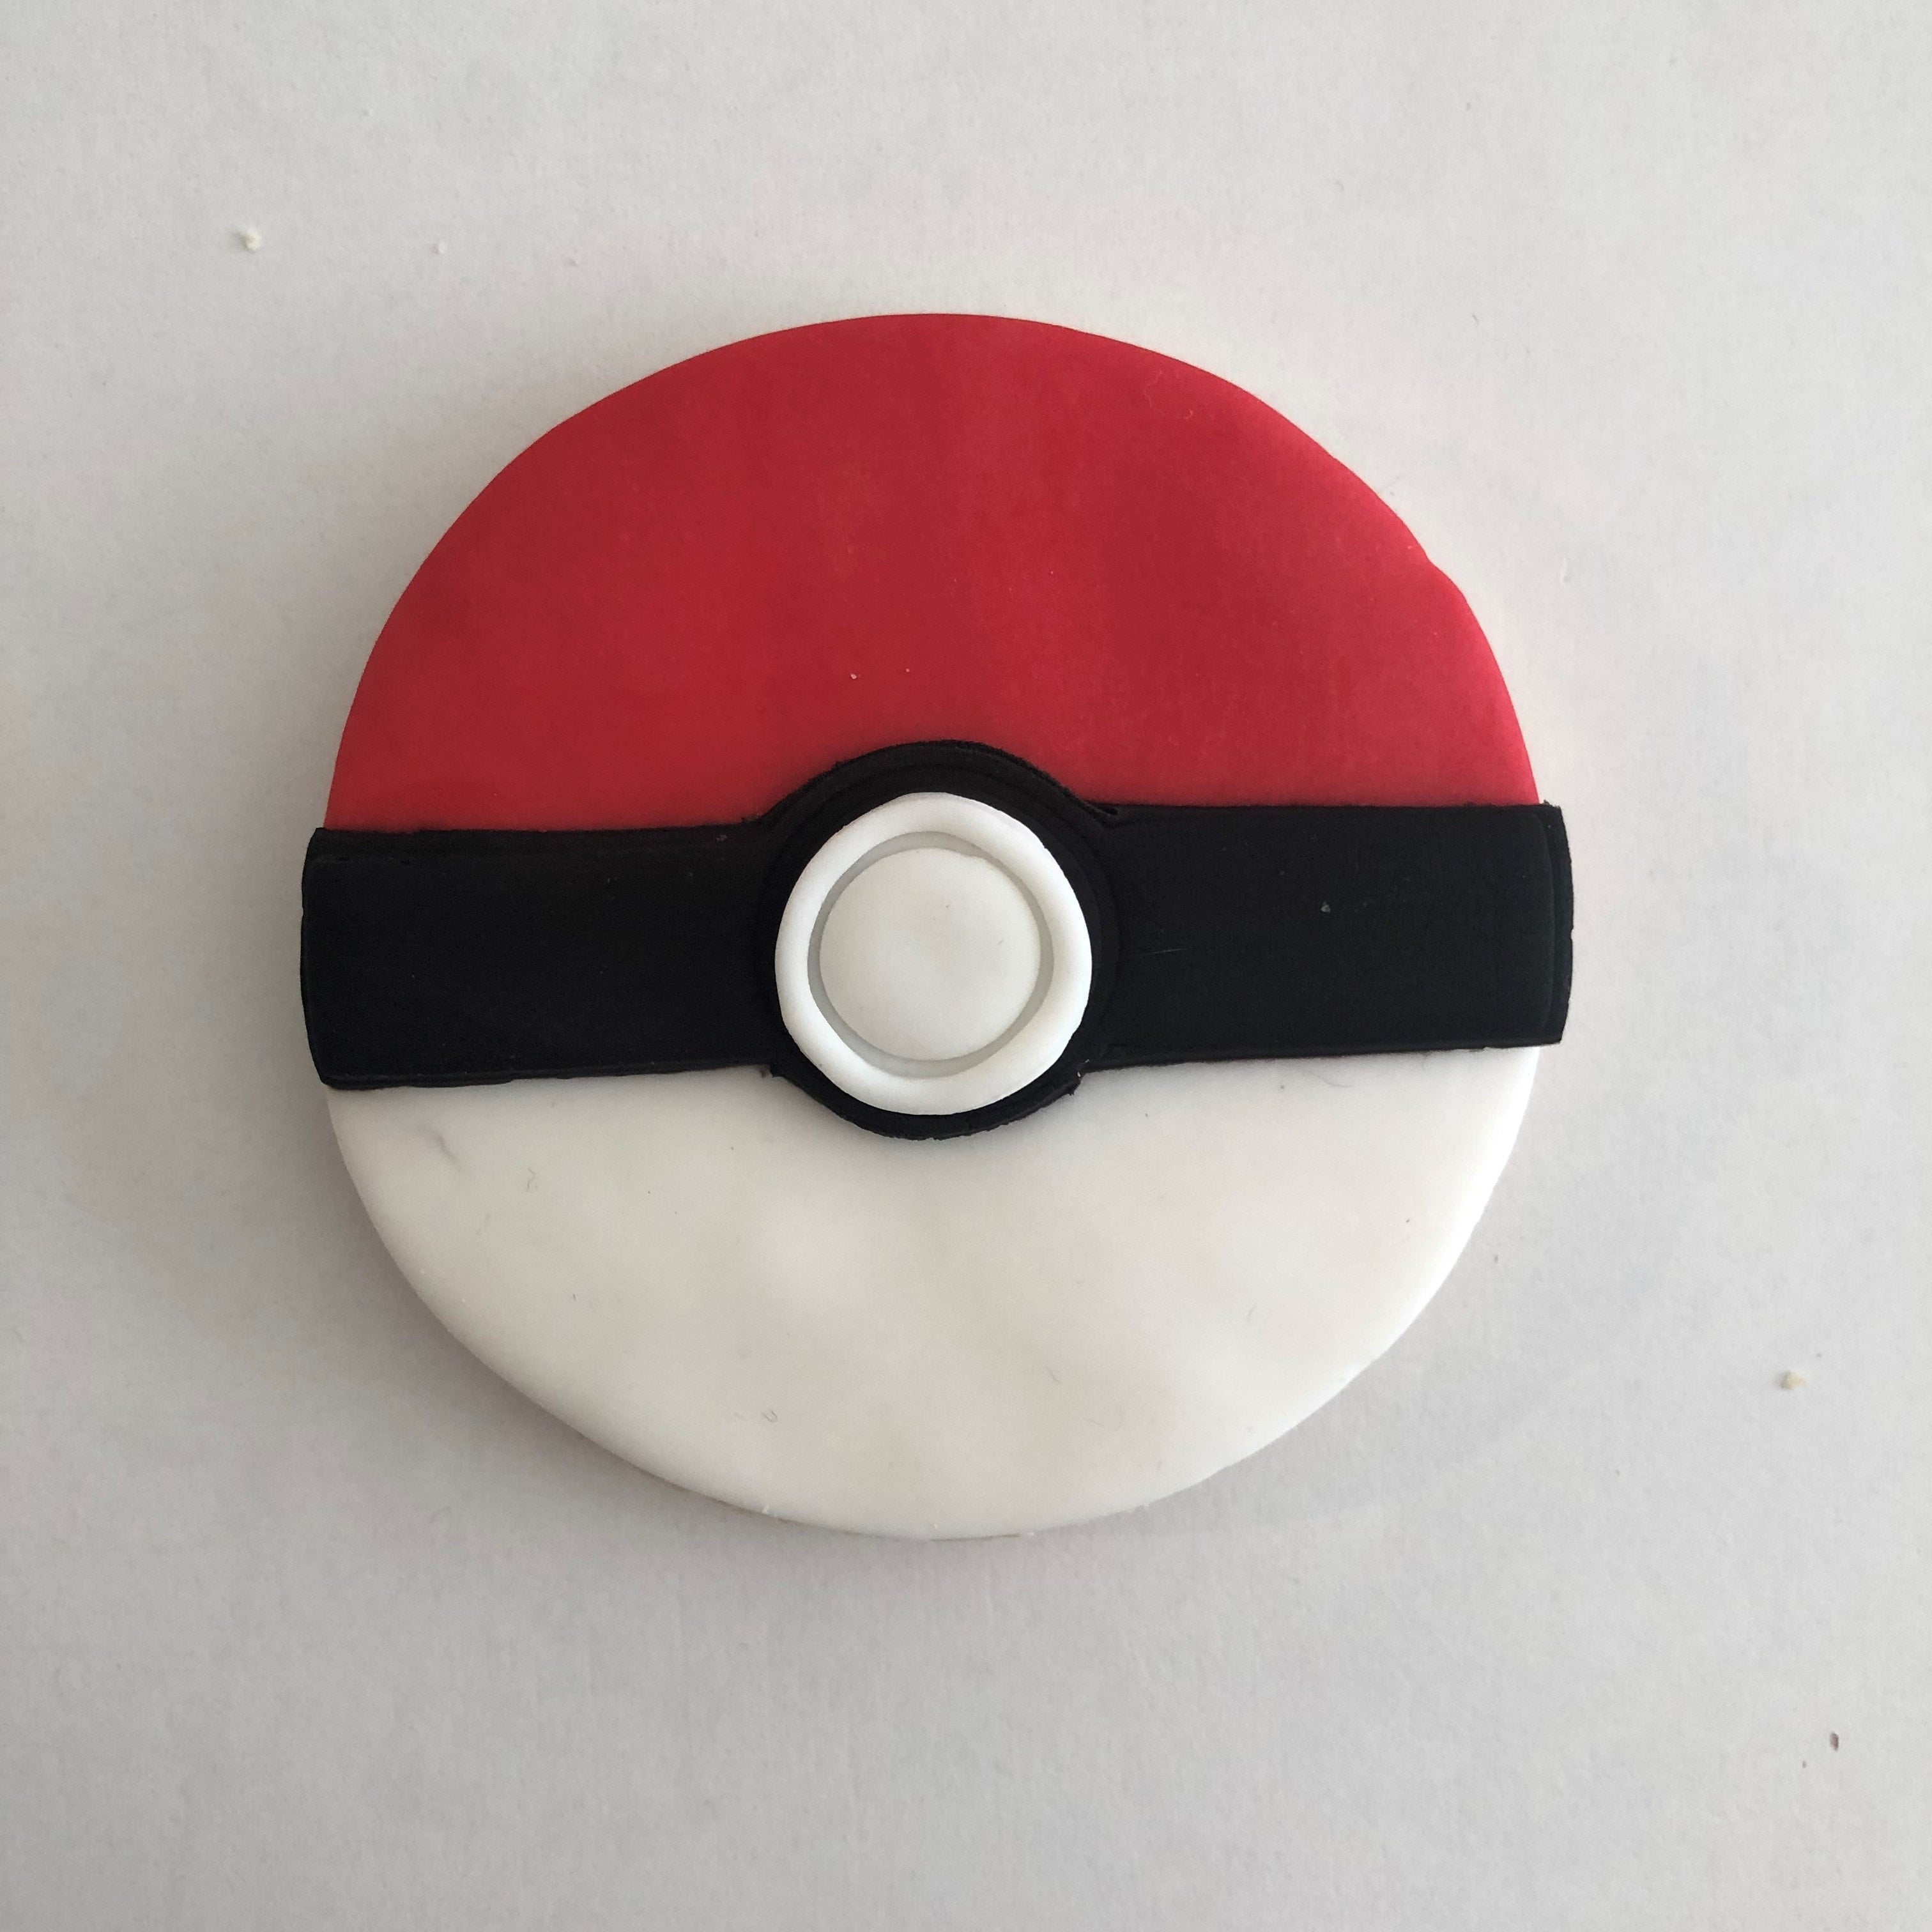 Kids Will Love These Pokémon Cupcakes! - Love These Recipes